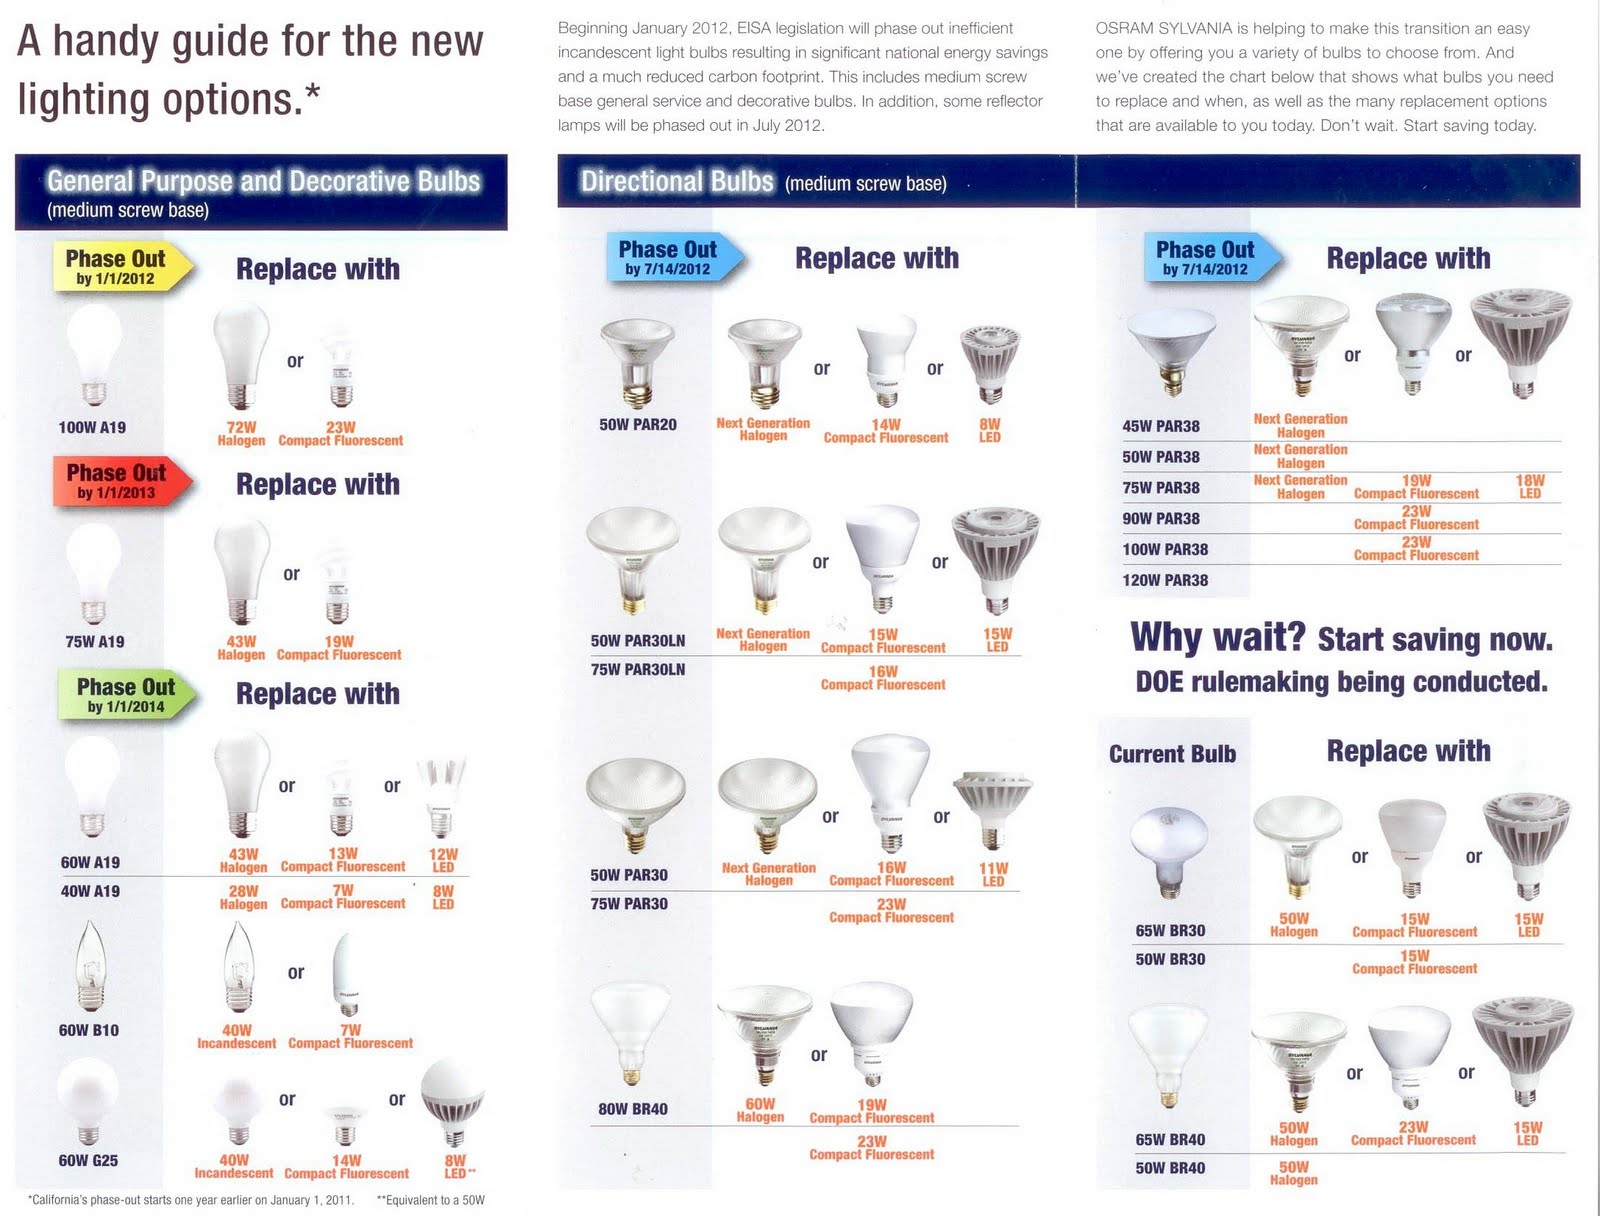 dominion-electric-lighting-blog-sylvania-s-handy-guide-for-the-new-bulb-options